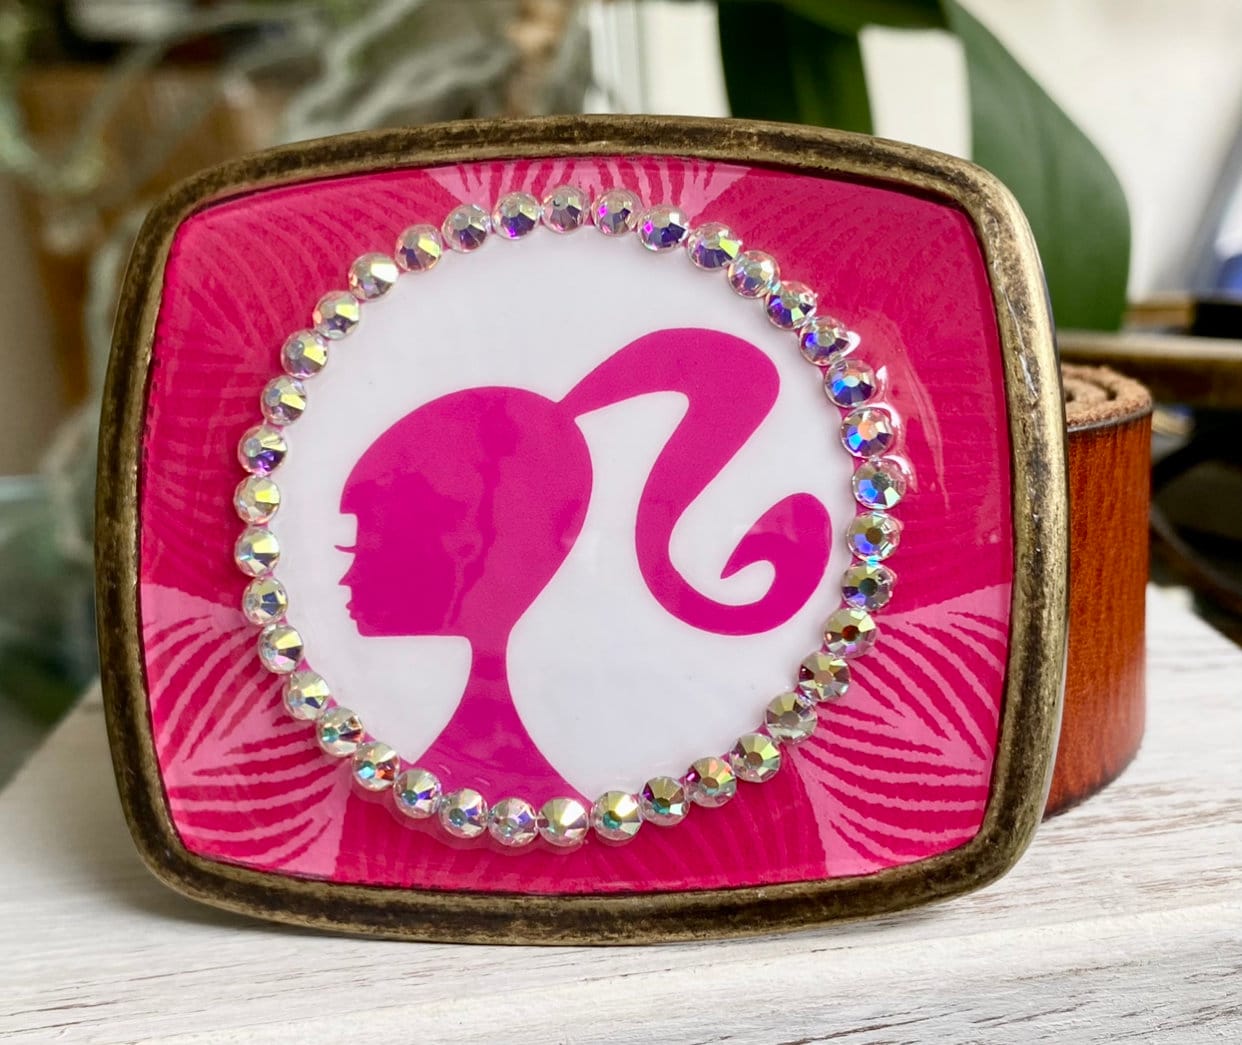 Blingy Doll-Themed Belts : the barbie pink